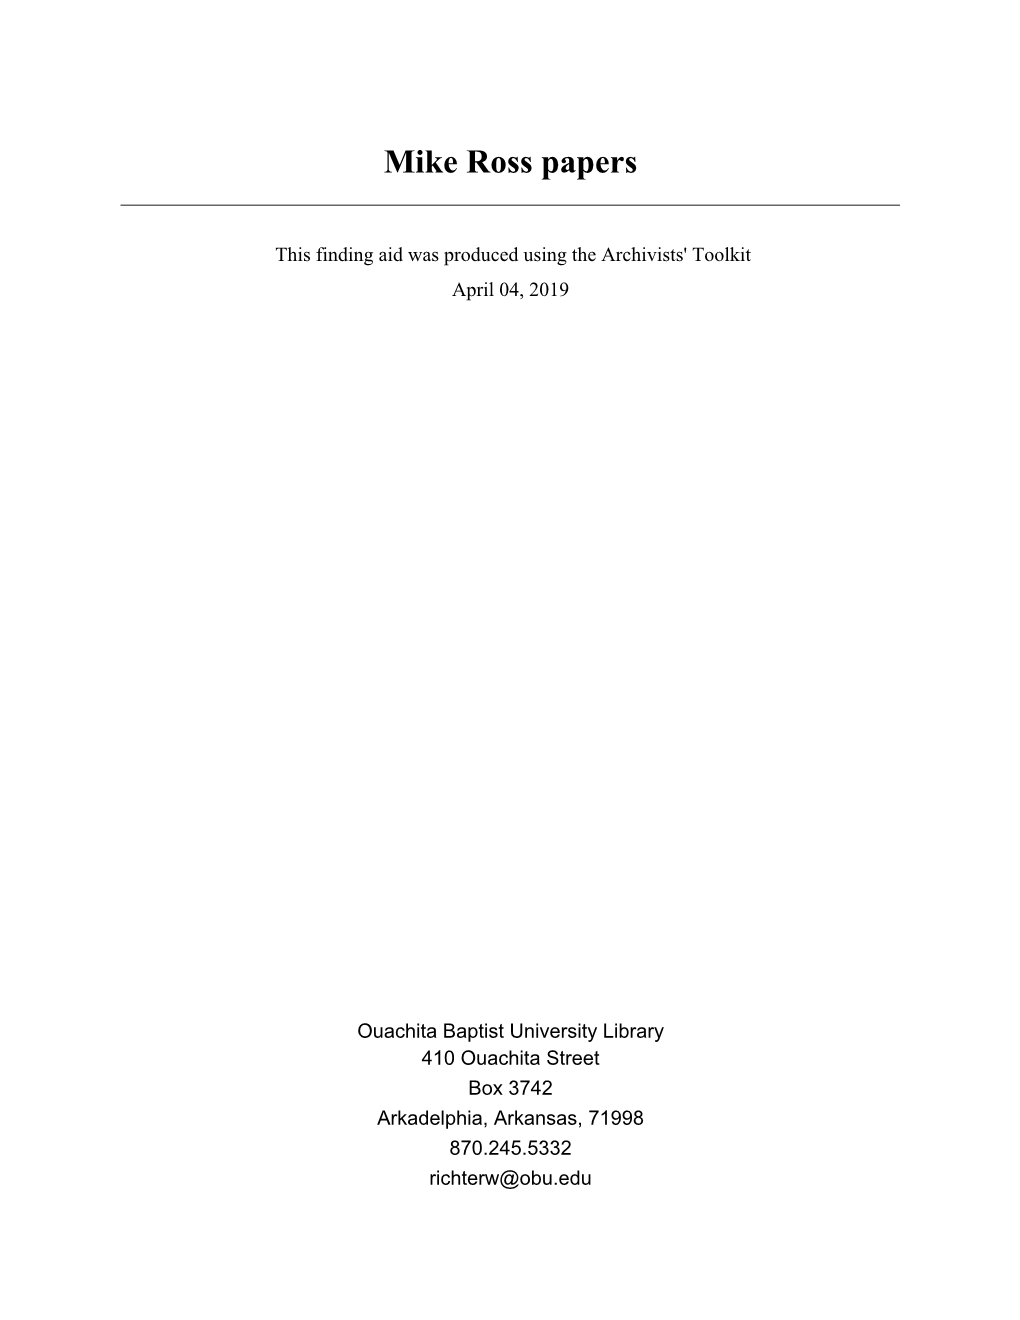 Mike Ross Papers